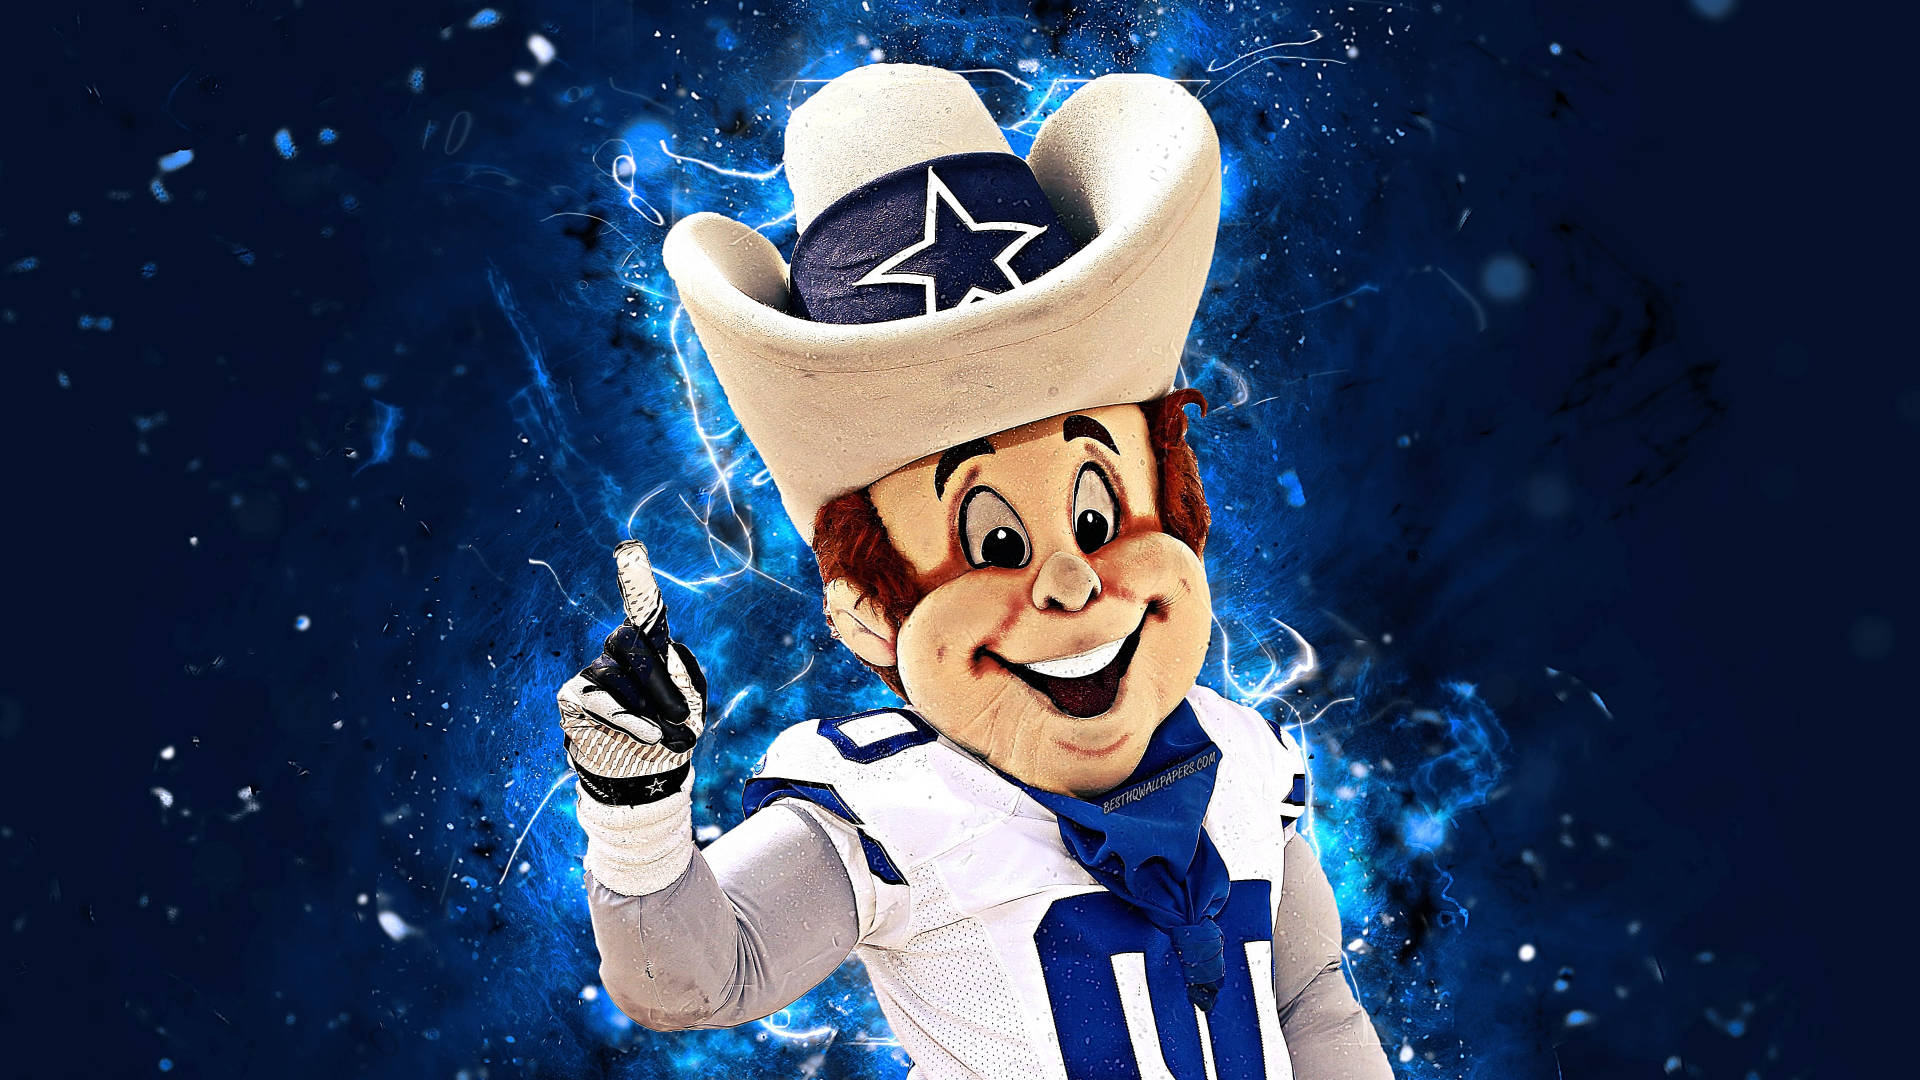 Rowdy, Mascot Of The Awesome Dallas Cowboys Wallpaper